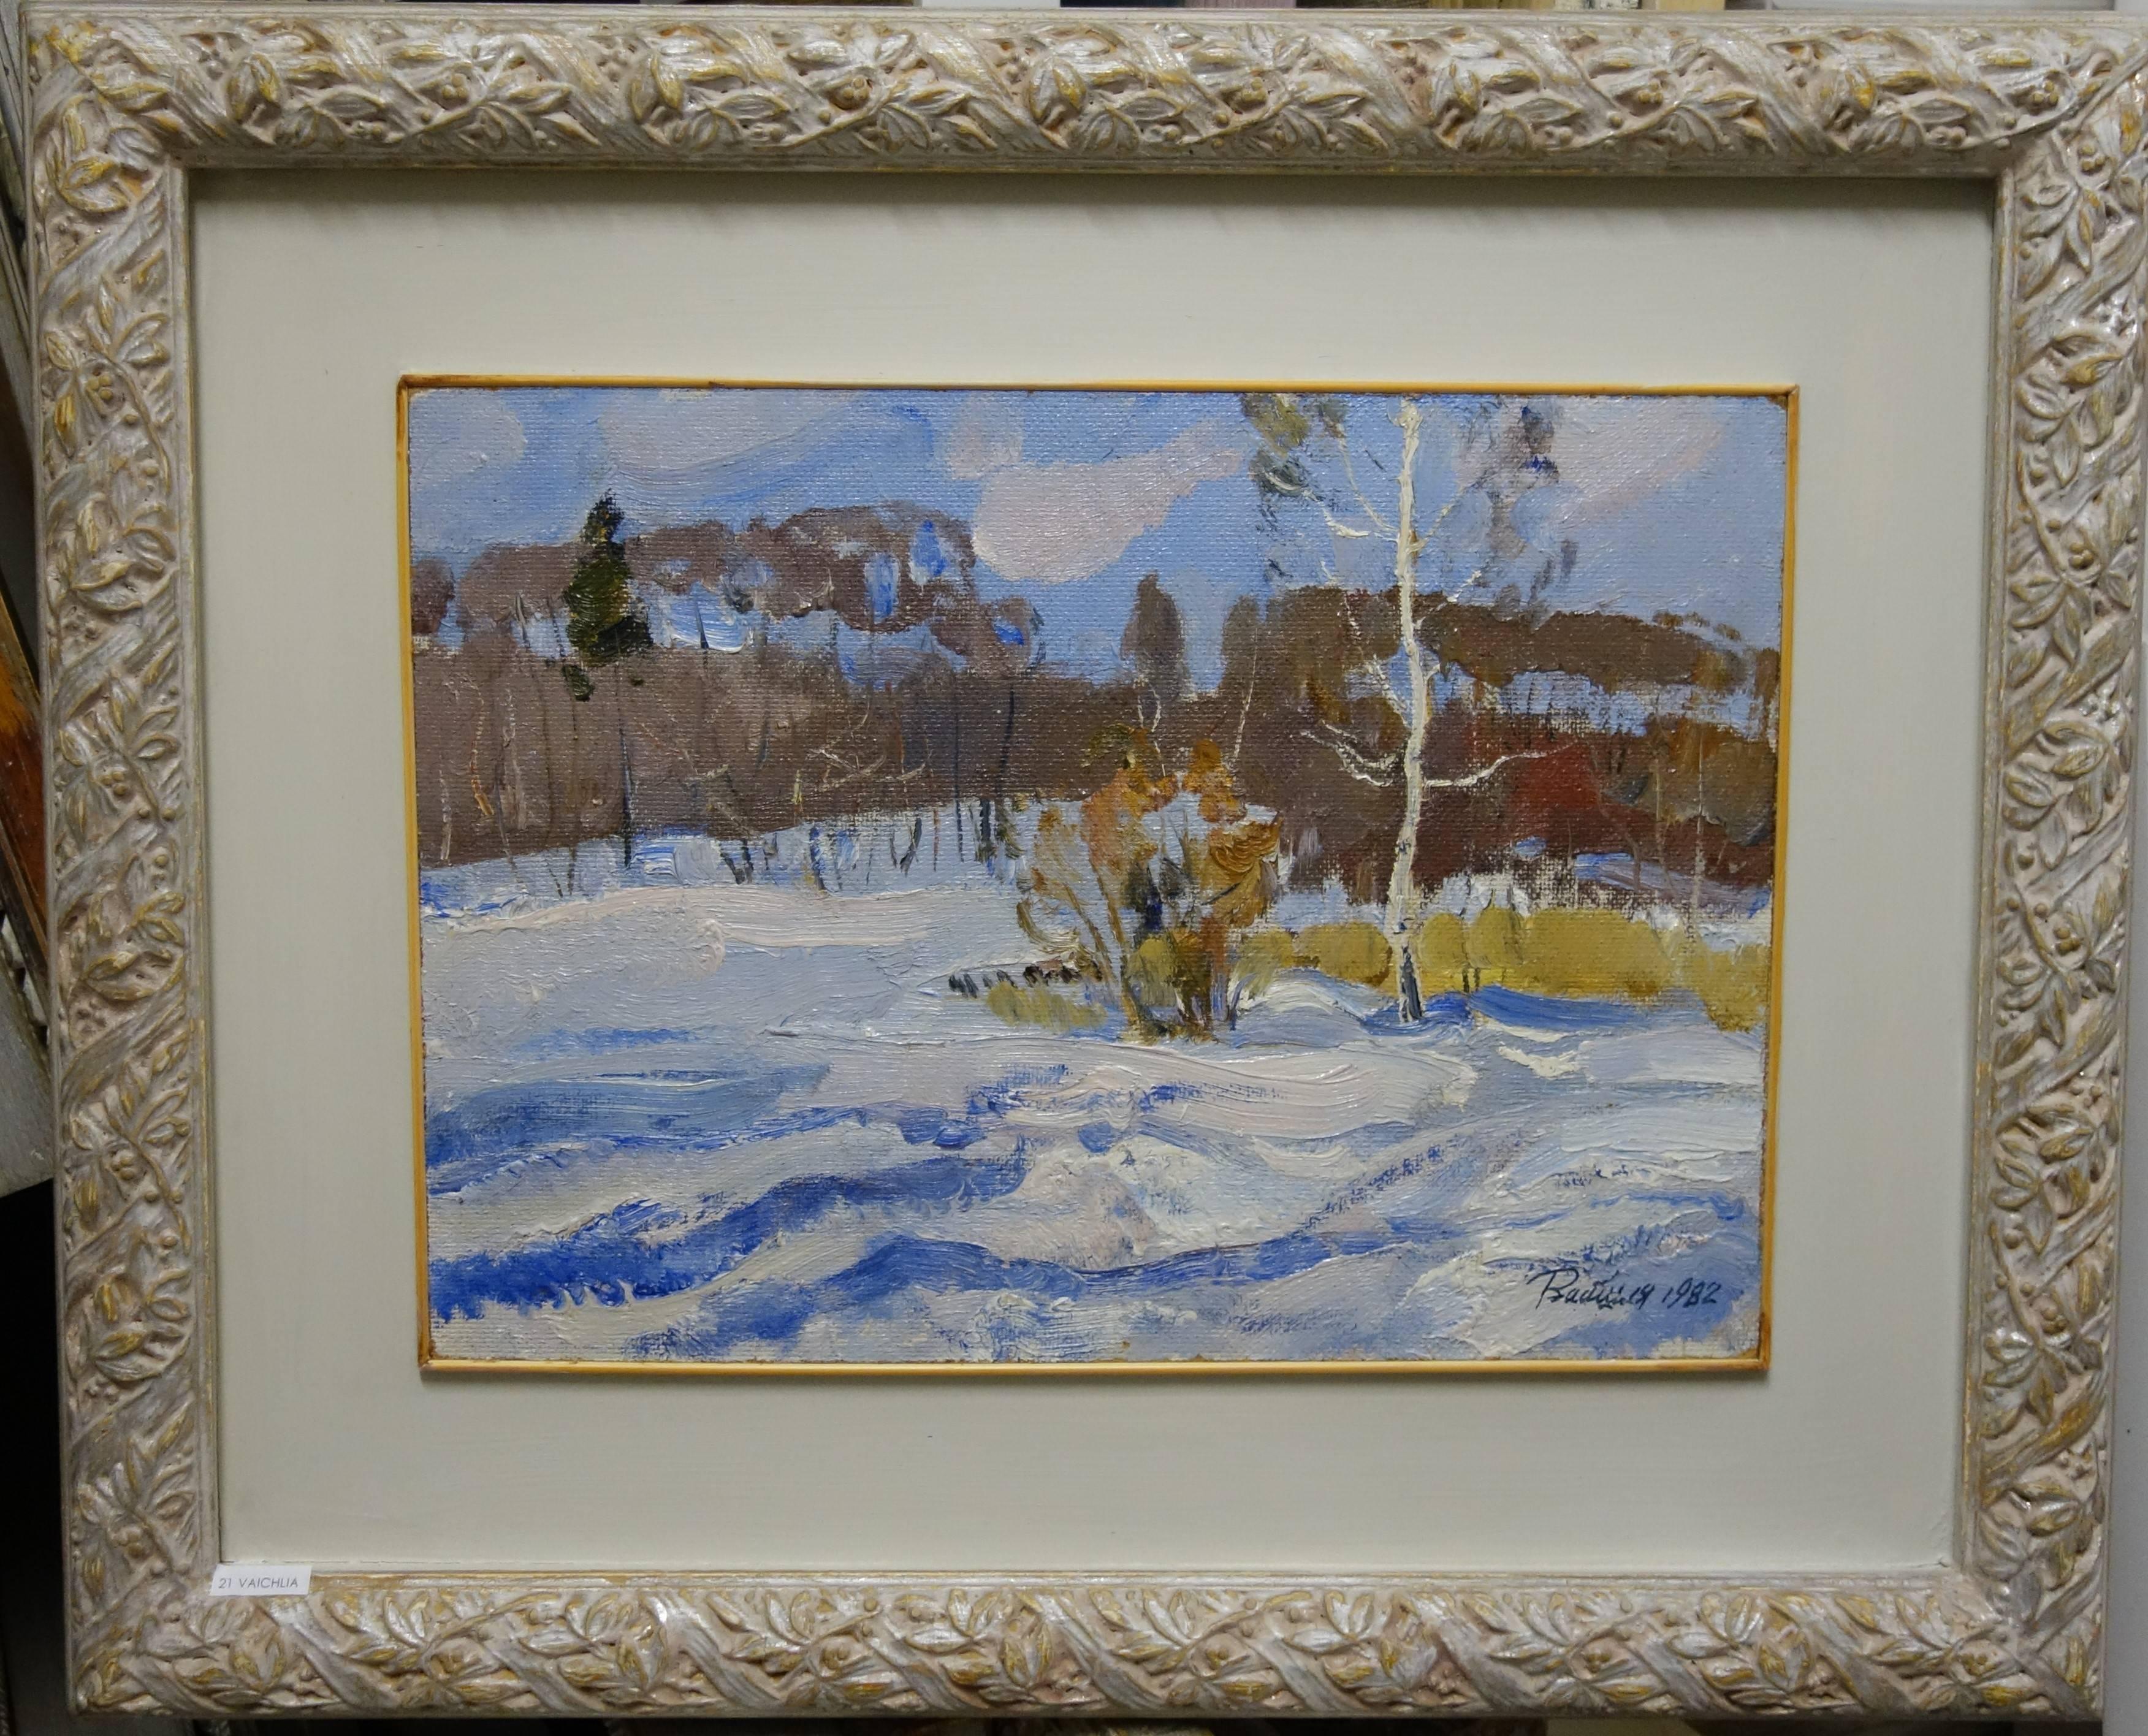 Cold morning   Oil  cm. 43 x 31 cm, 1982 - Painting by Leonid VAICHILIA